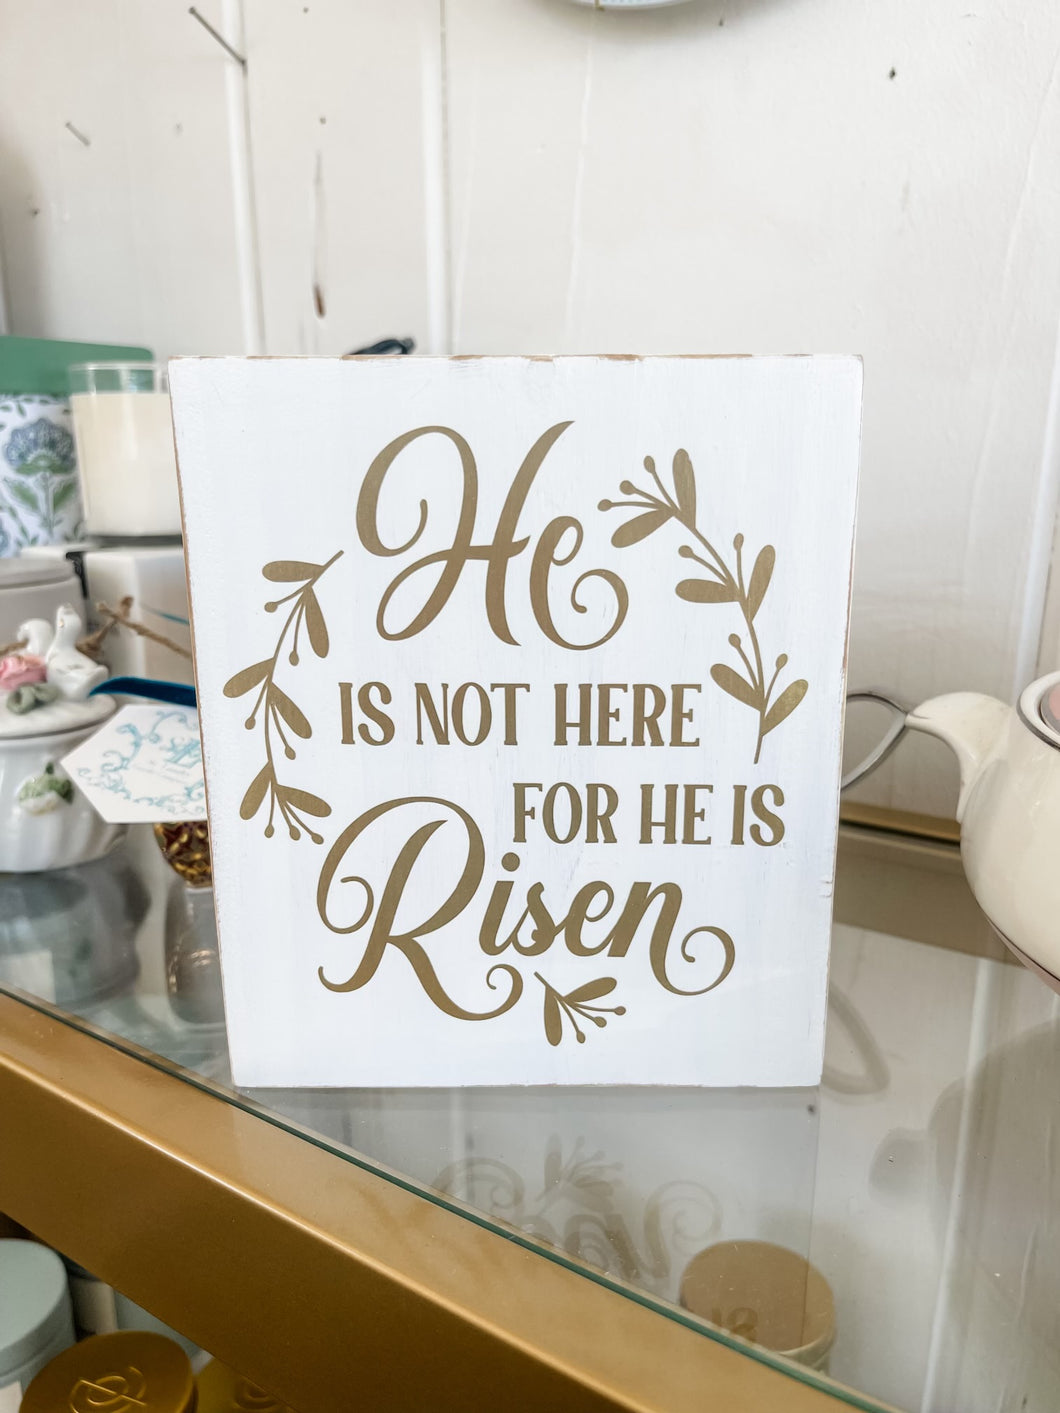 “He is not here for he is risen” on Wood-Christina Yeager Designs